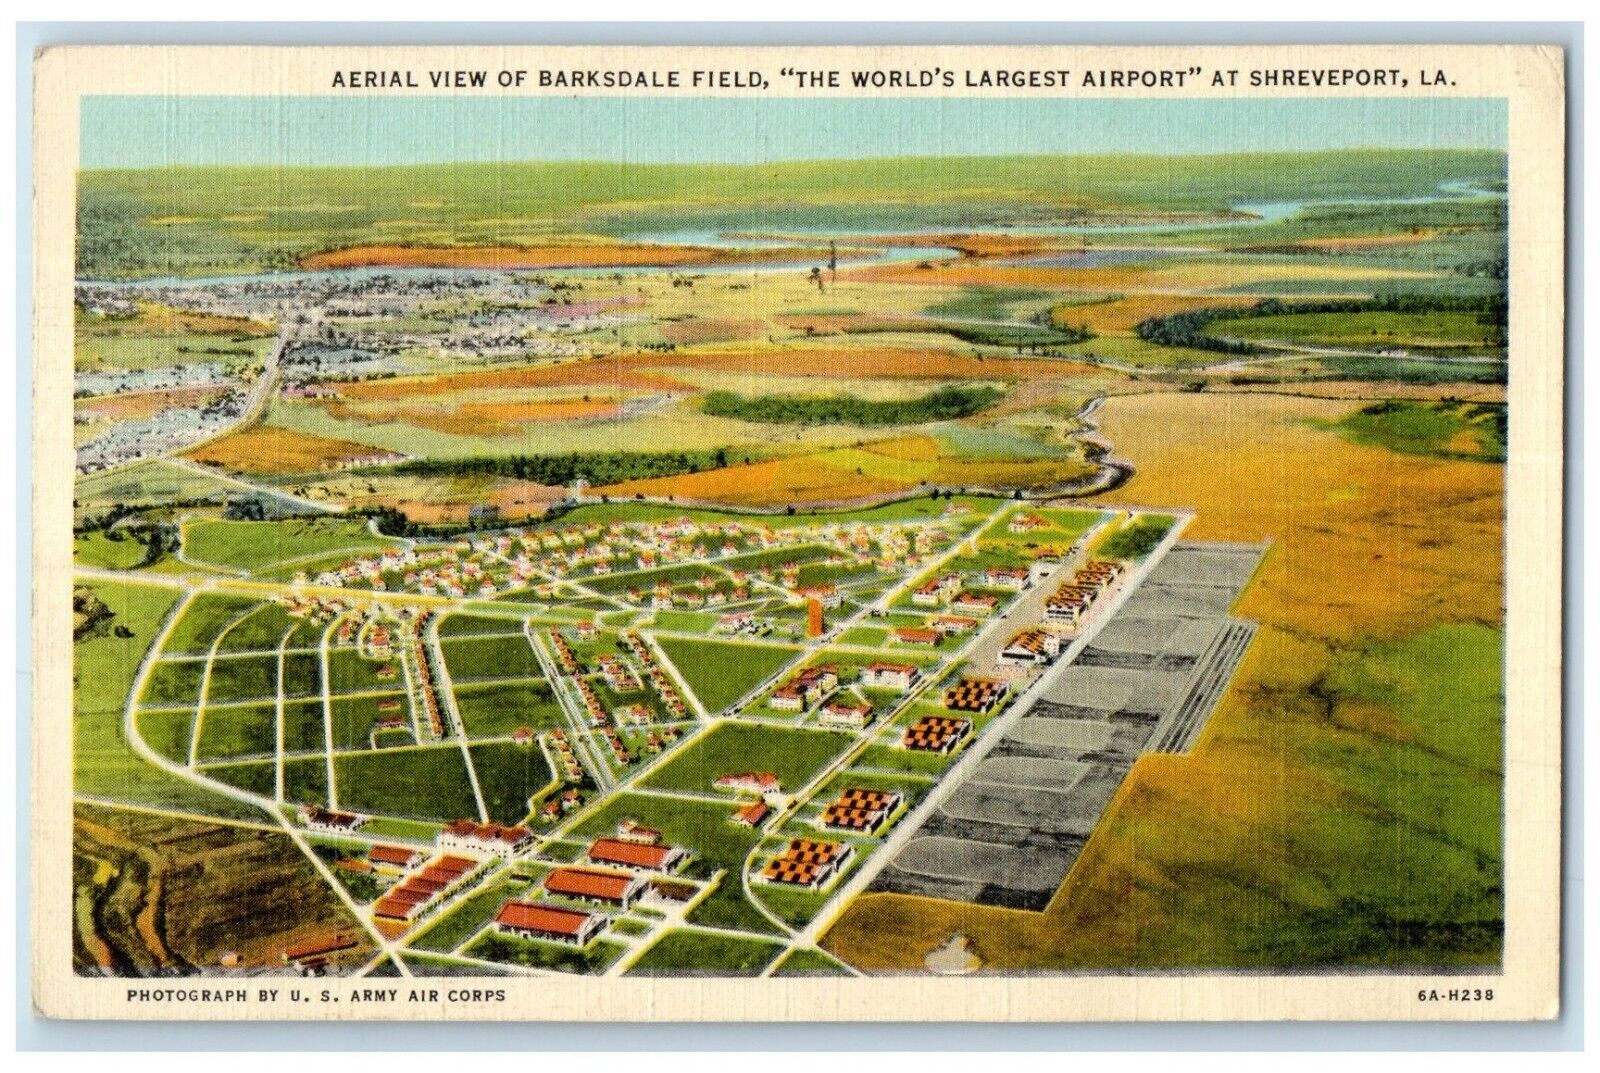 1939 Aerial View Barksdale Field Largest Airport Shreveport Louisiana Postcard